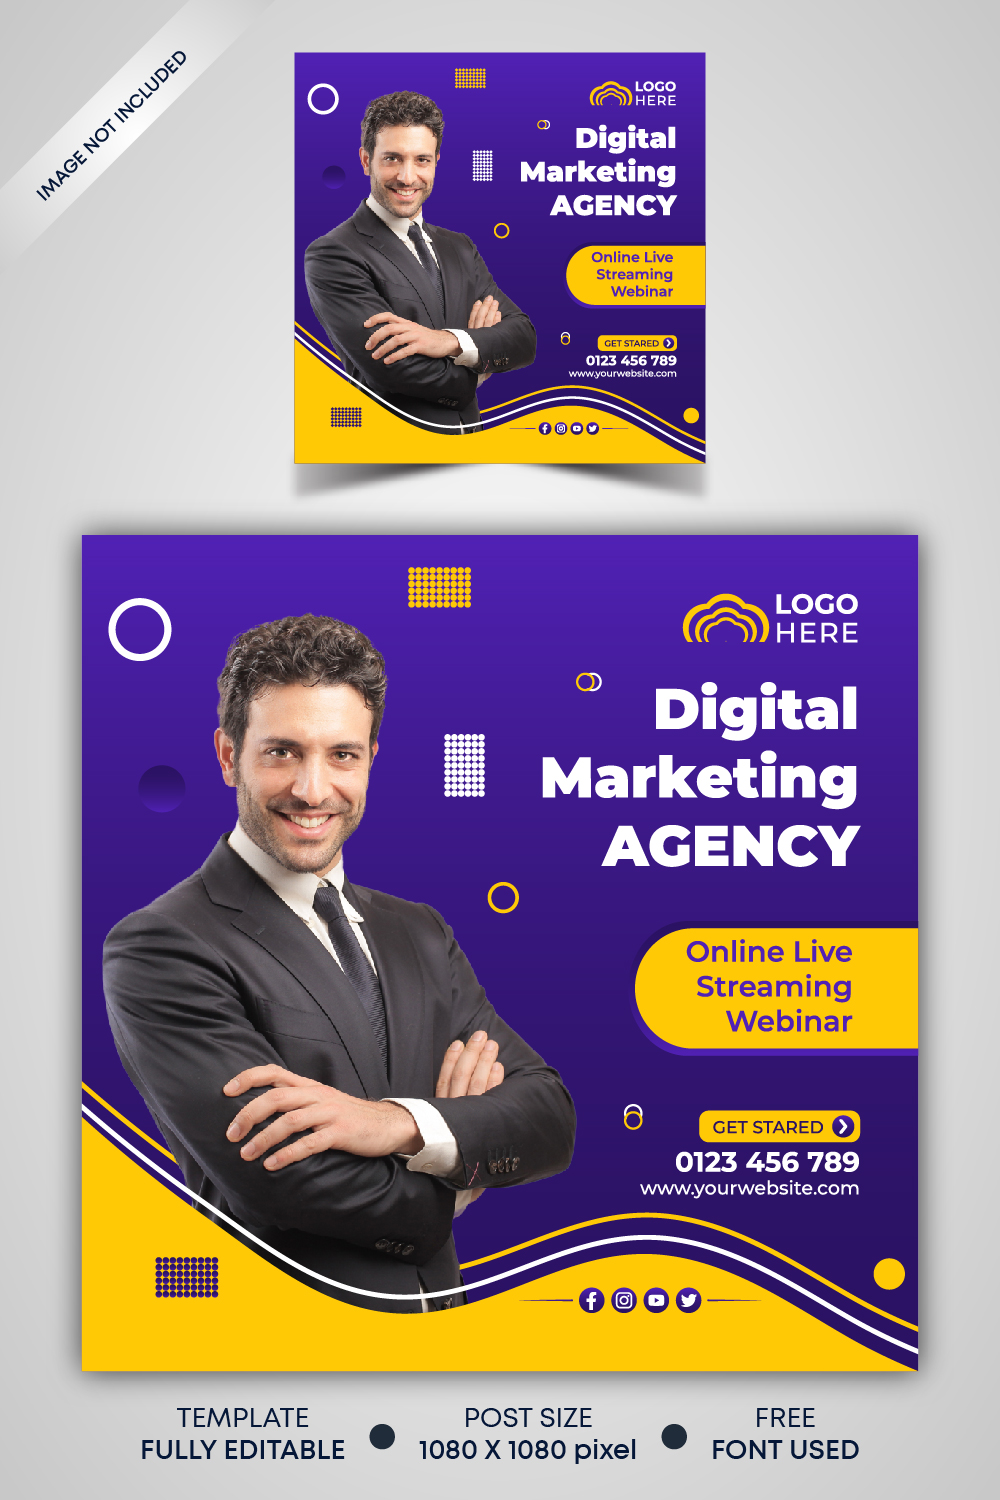 Creative Idea Digital Marketing Agency Social Media Post Template and Corporate Web Banner Design pinterest preview image.